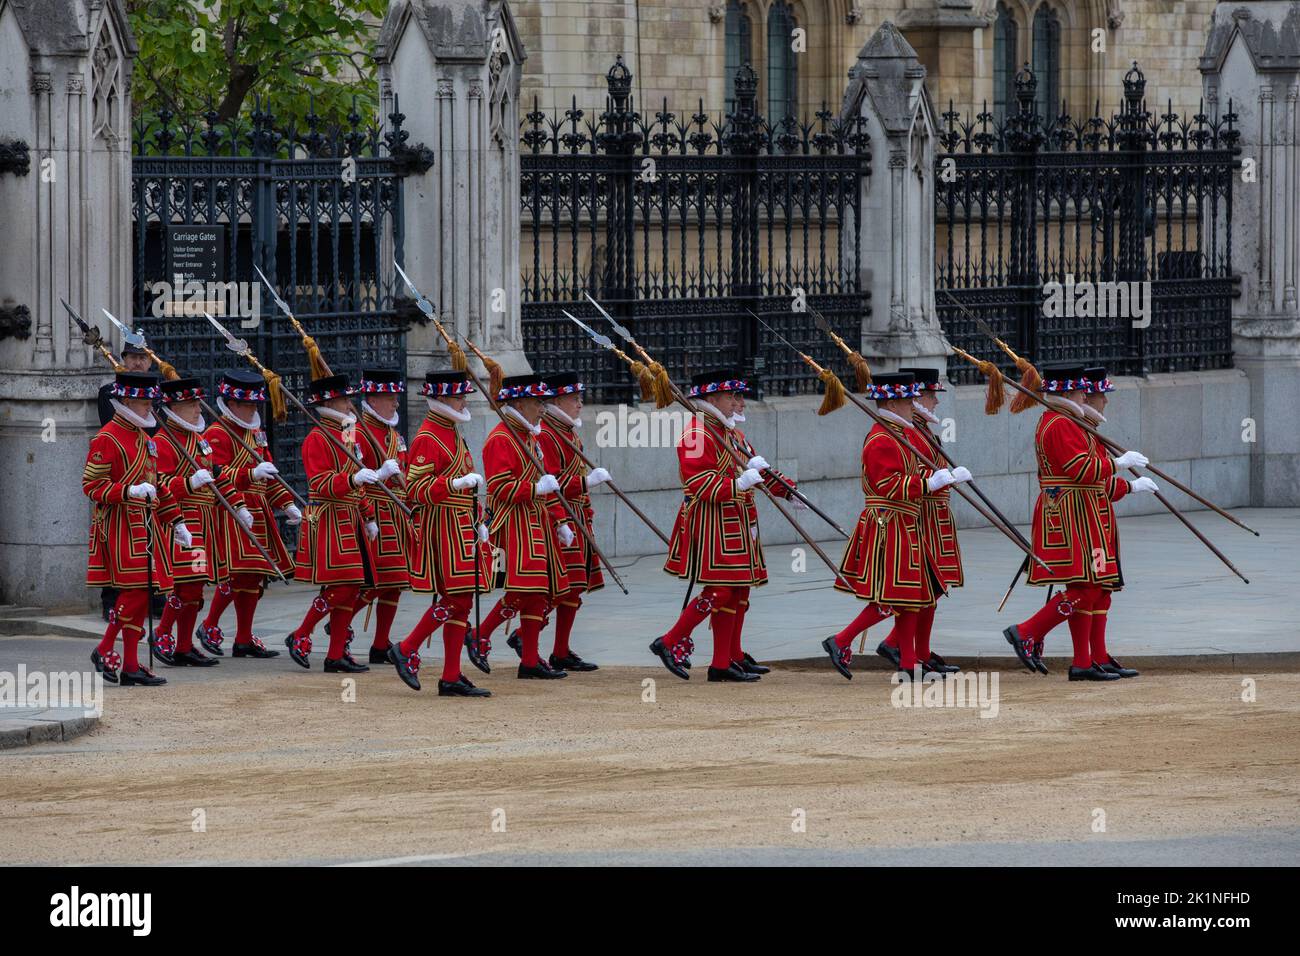 London, England. 19th September, 2022. Beefeaters leave the Palace of Westminster. The State Funeral of Queen Elizabeth II held in London and Windsor  today was one of the biggest events the country has ever seen. Credit: Kiki Streitberger / Alamy Live News Stock Photo